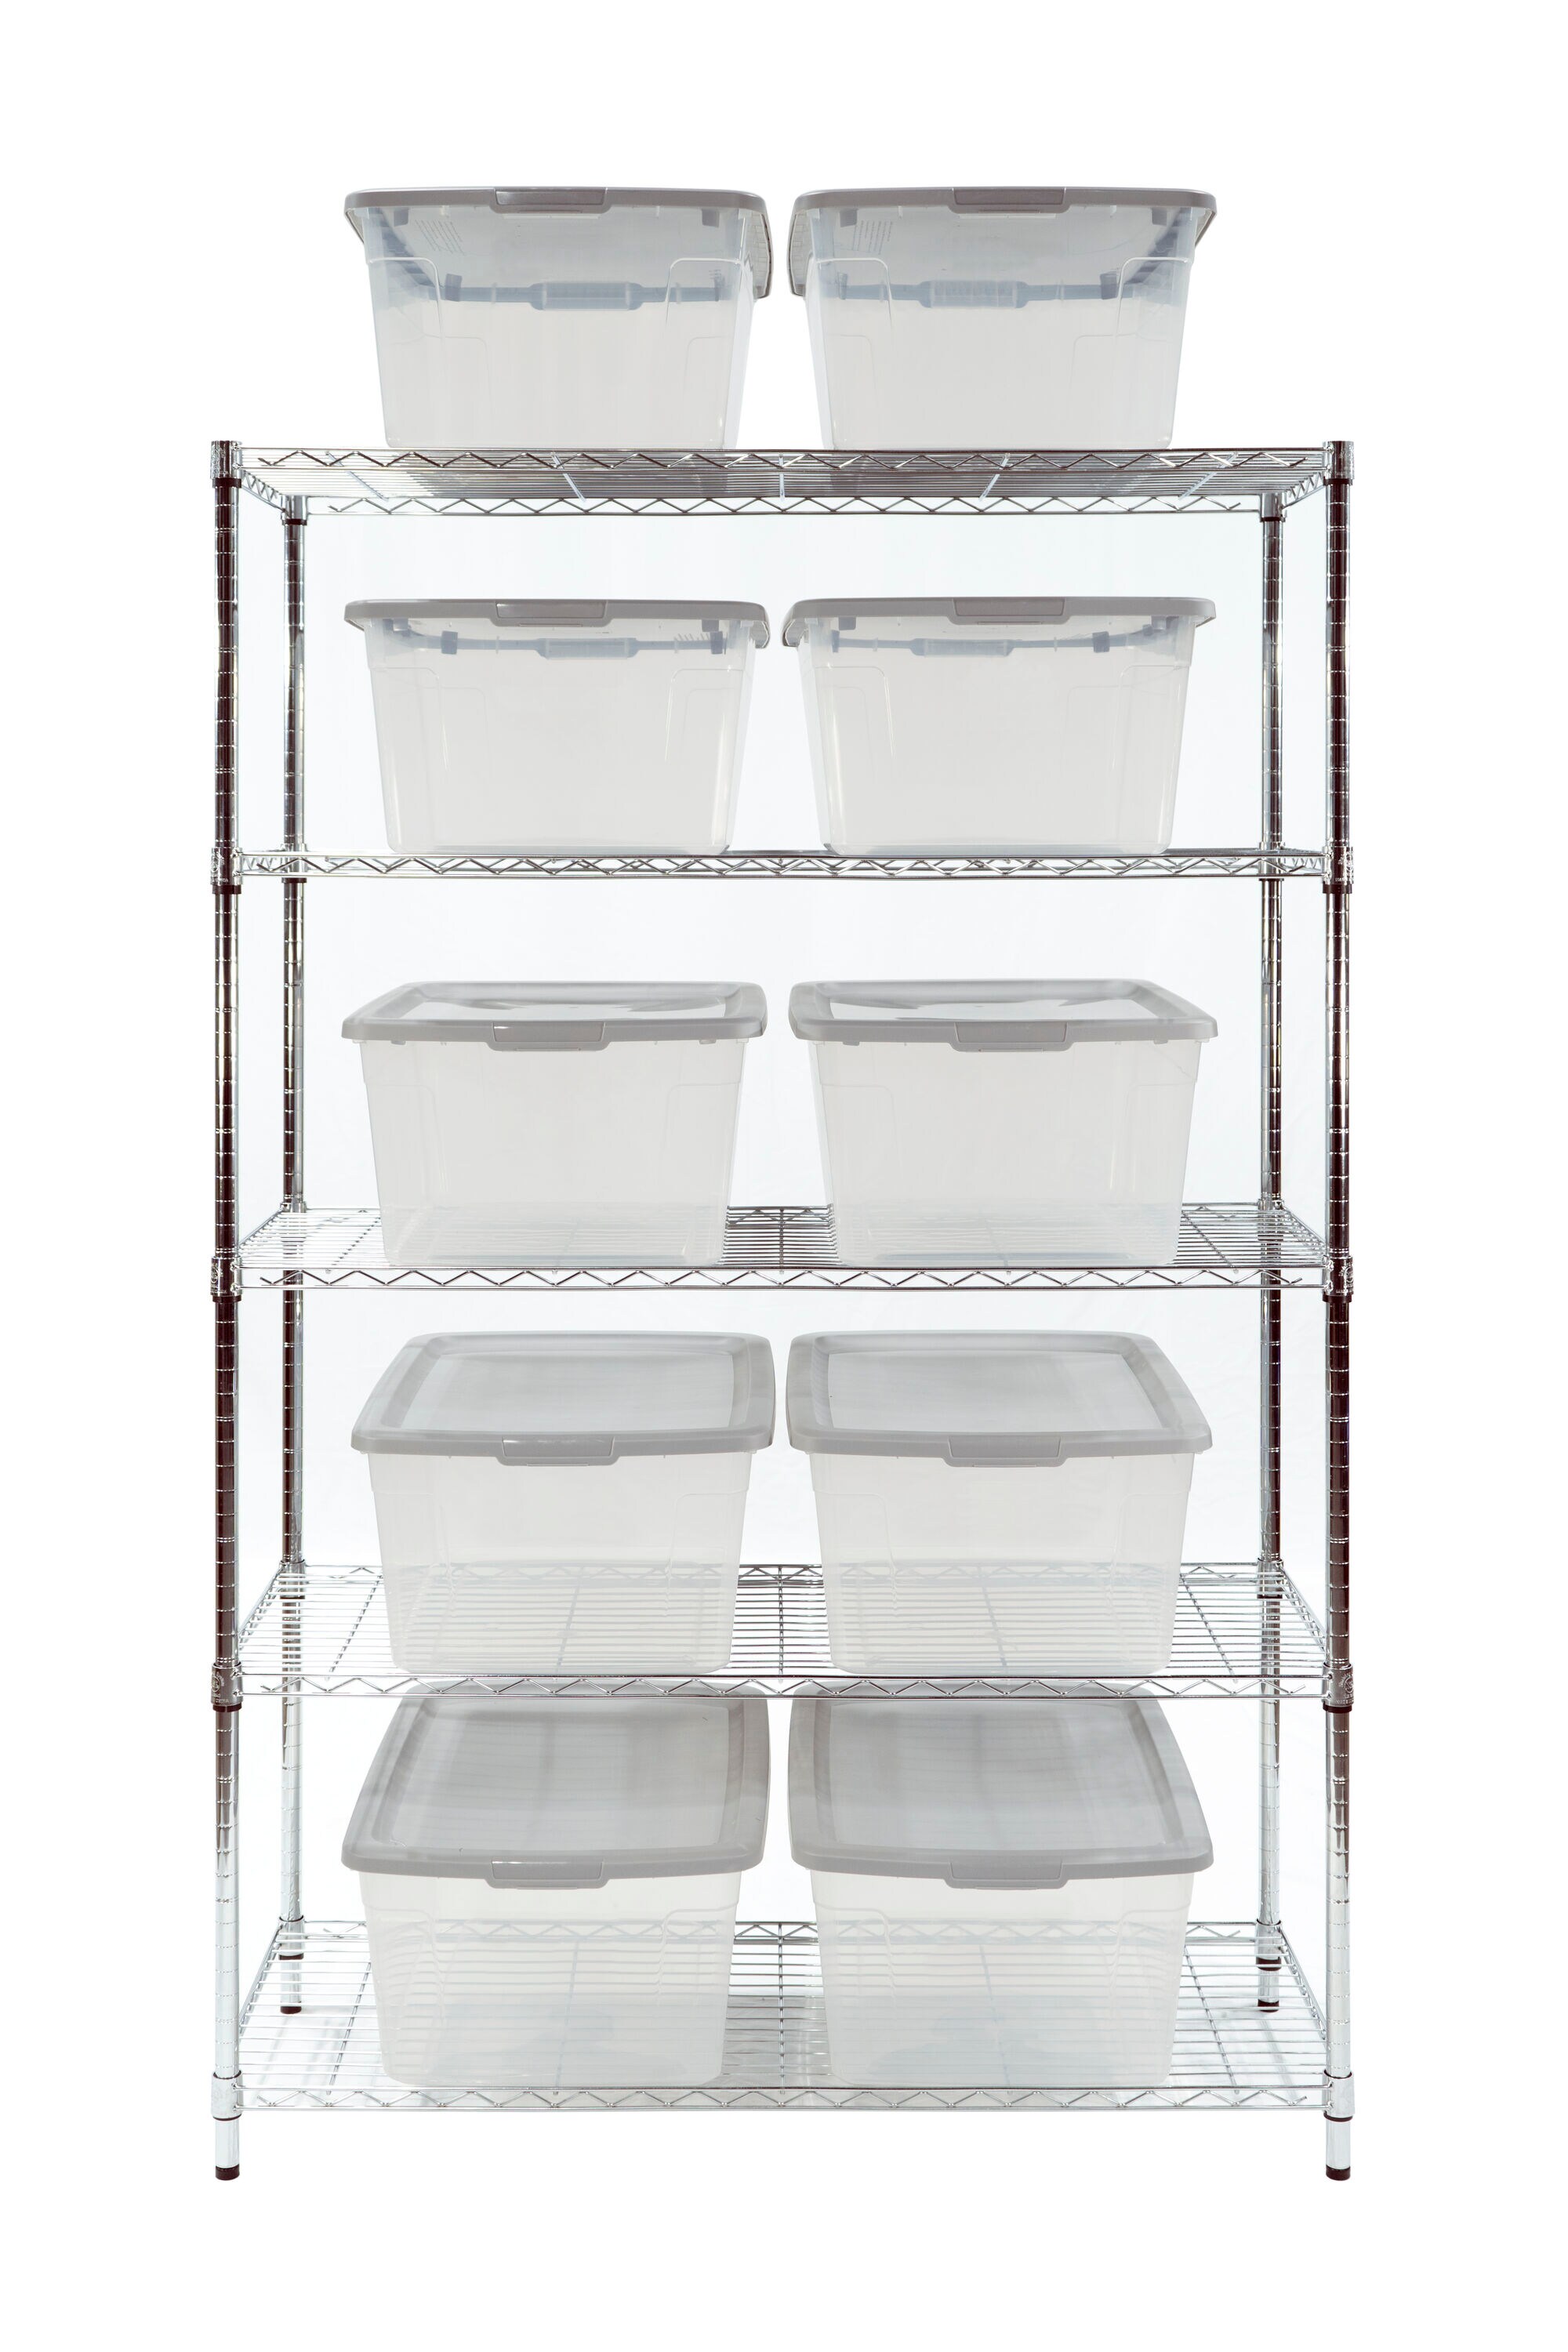 Shop Project Source Commander Plastic Storage Container and Shelf